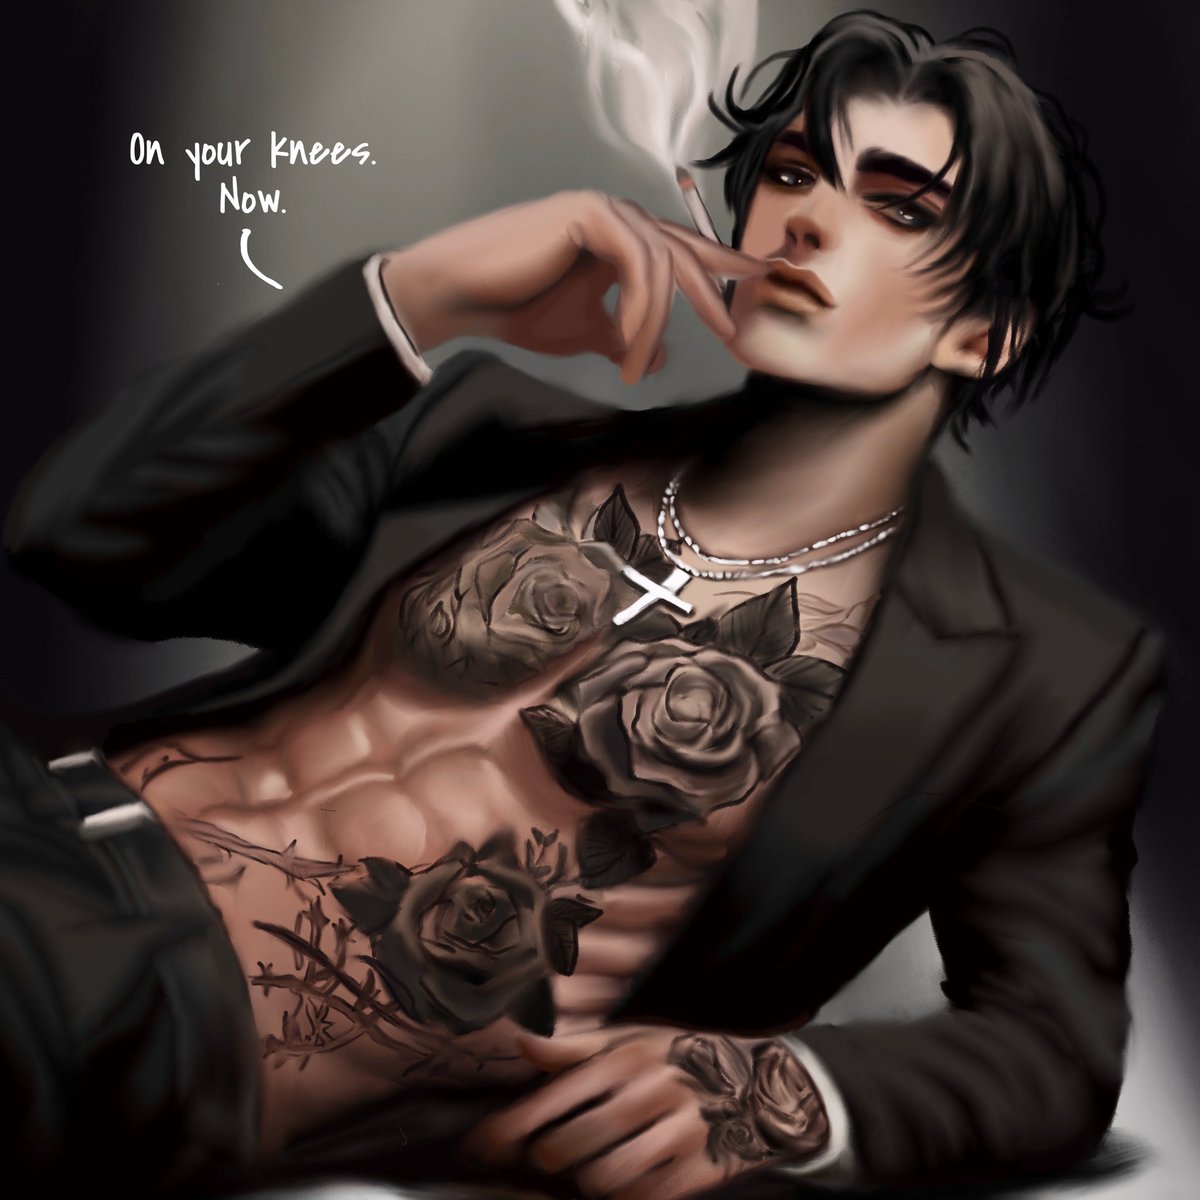 Yes sir 🧎‍♀️ 📚 The Devil Tainted Us (A Gothic, Age Gap and Forbidden Romance) amazon.com/Devil-Tainted-… #booktwt #characterart #darkromance